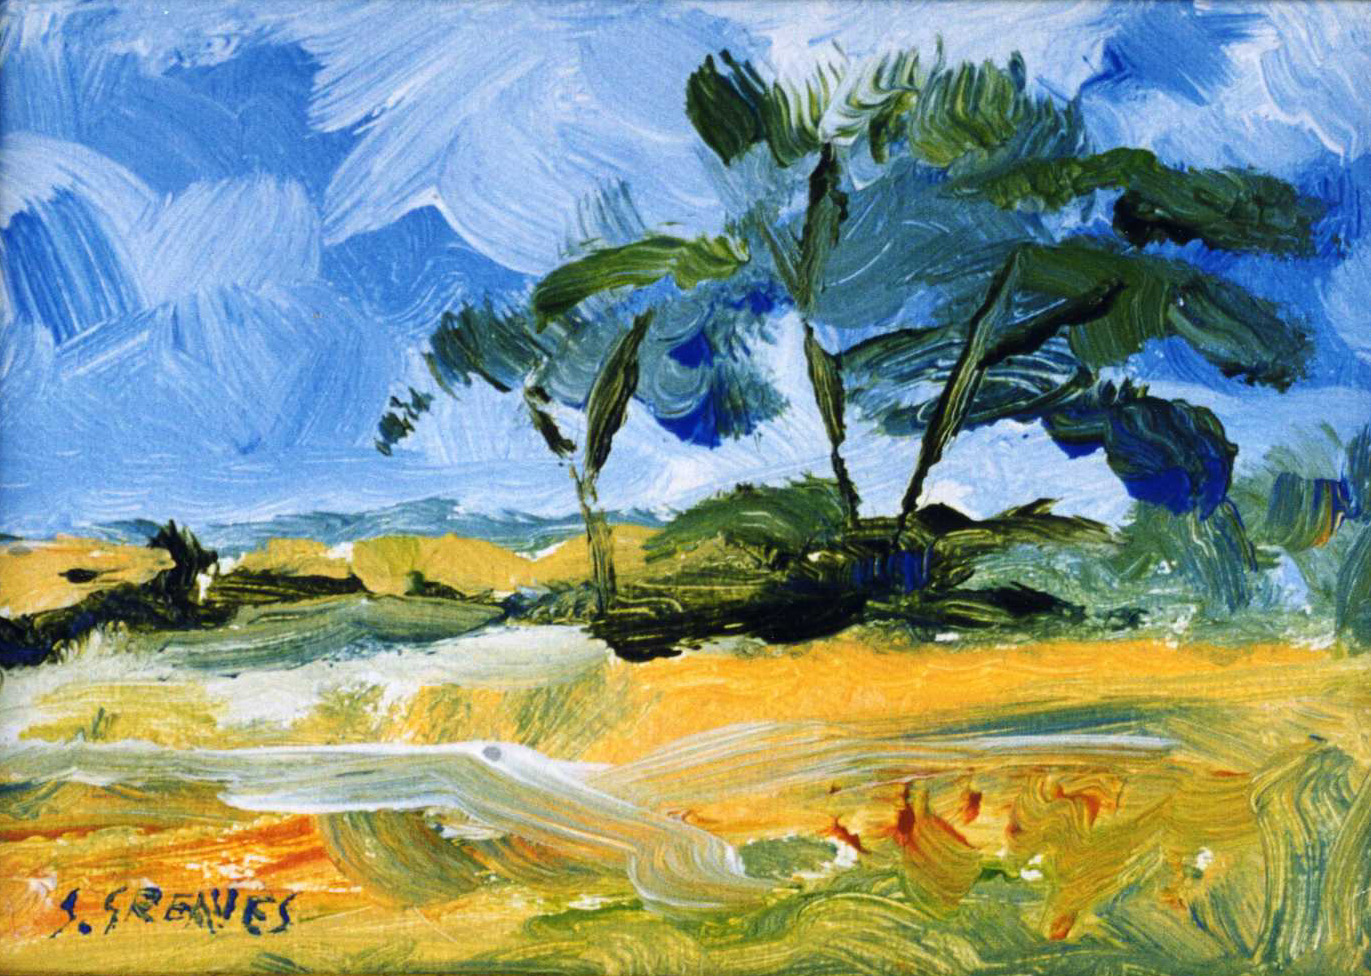 Steve Greaves - Wentworth Corn Field - expressionist landscape painting